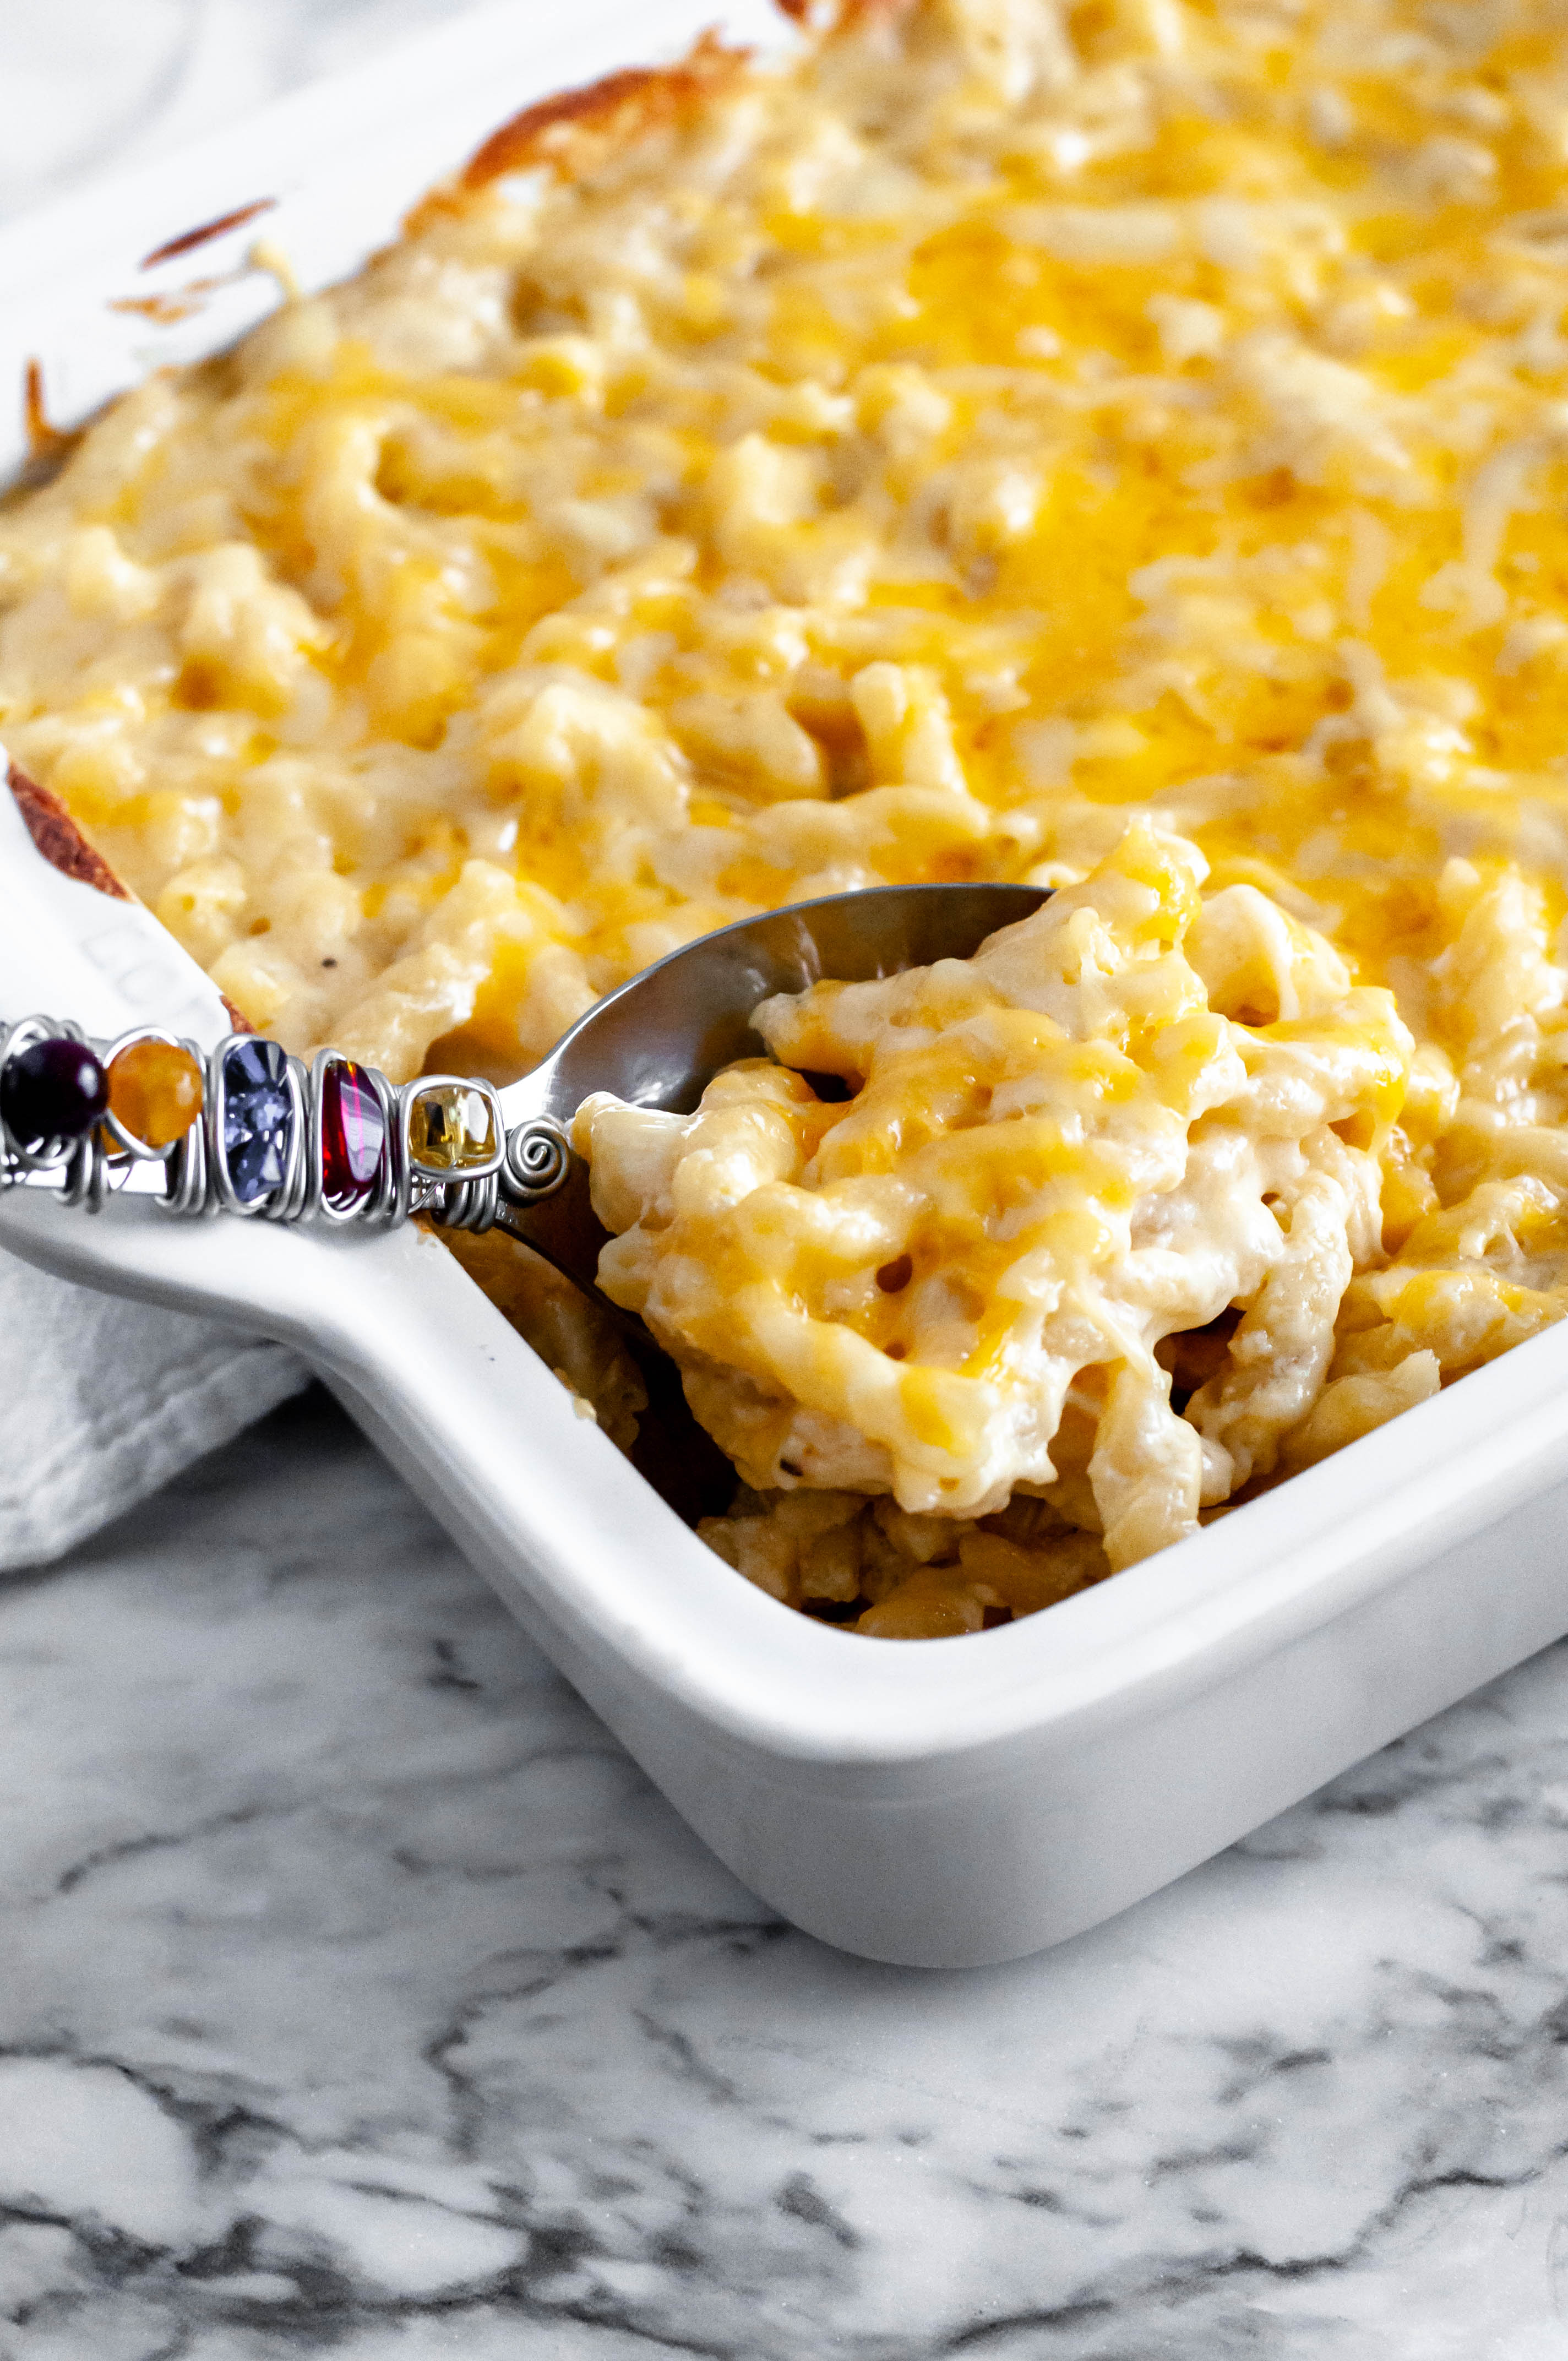 This creamy Smoked Gouda and Sharp Cheddar Macaroni and Cheese is the ultimate pasta dish. Smoky gouda and sharp cheddar make the most flavorful cheese sauce. Just what your holiday table needs.